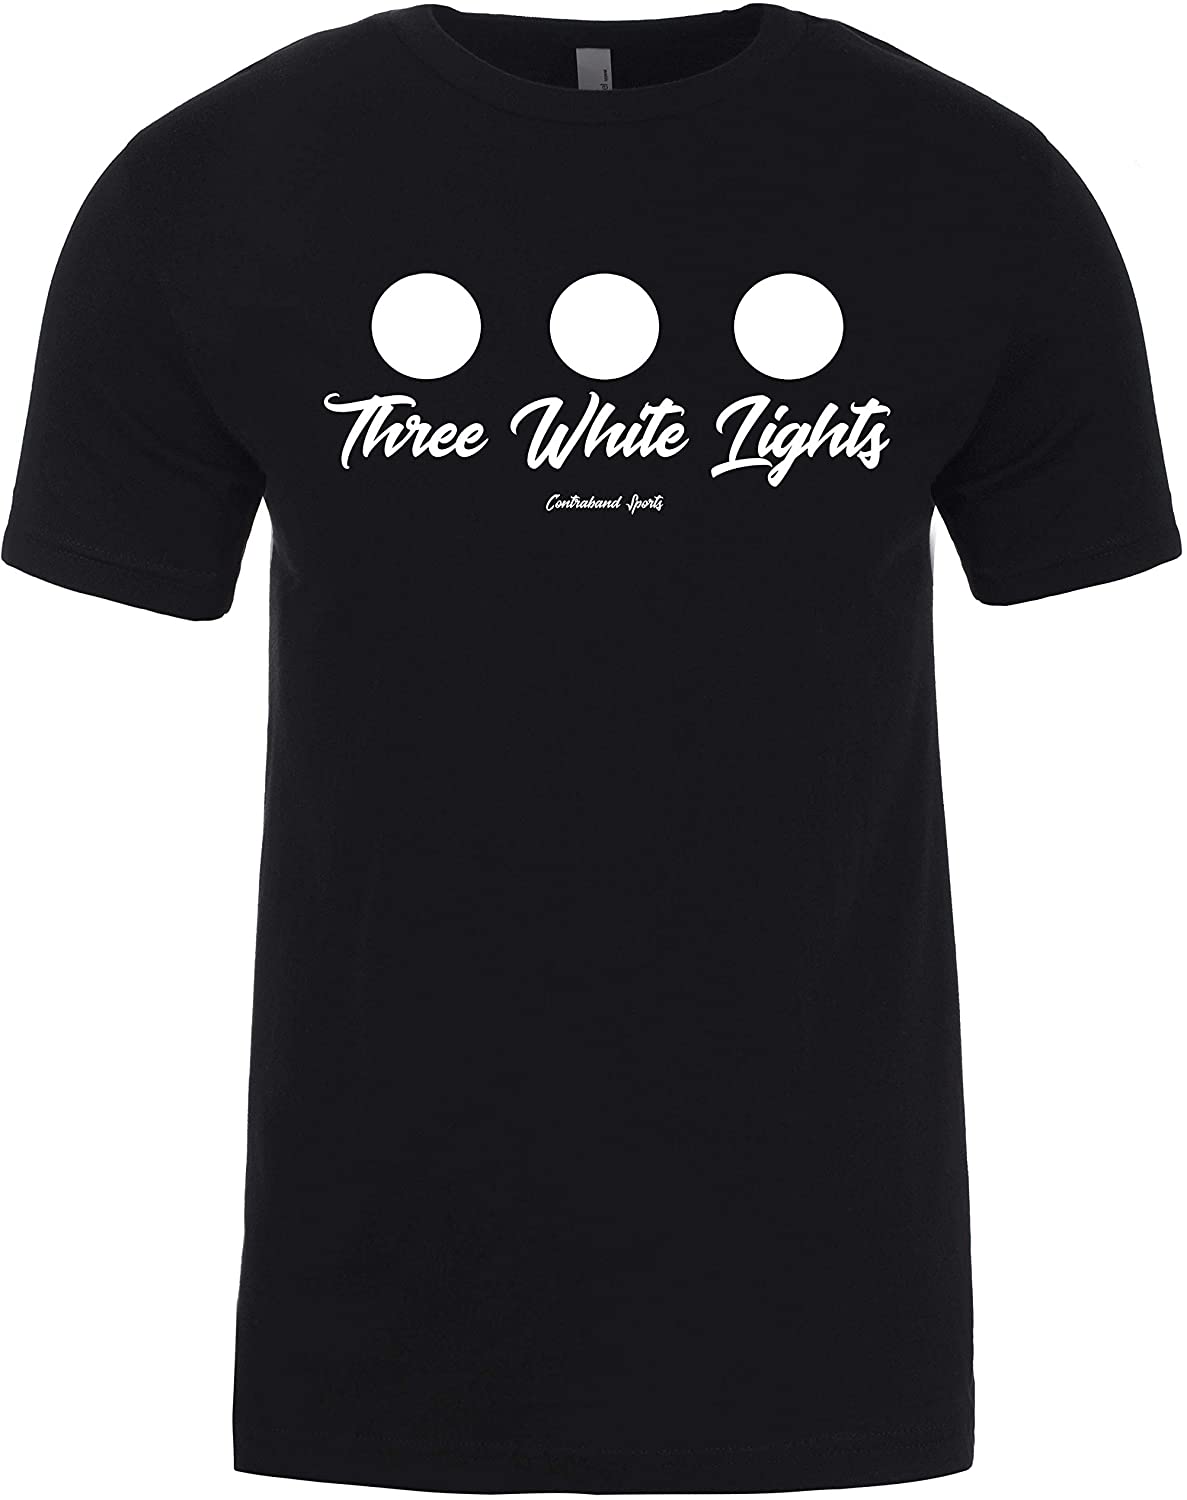 Contraband Sports 10309 Three White Lights Designed T-Shirt | 100% Cotton Athletic Fit Crew Neck Short Sleeve Tee Shirt for Men (Black, Small) - image 1 of 2